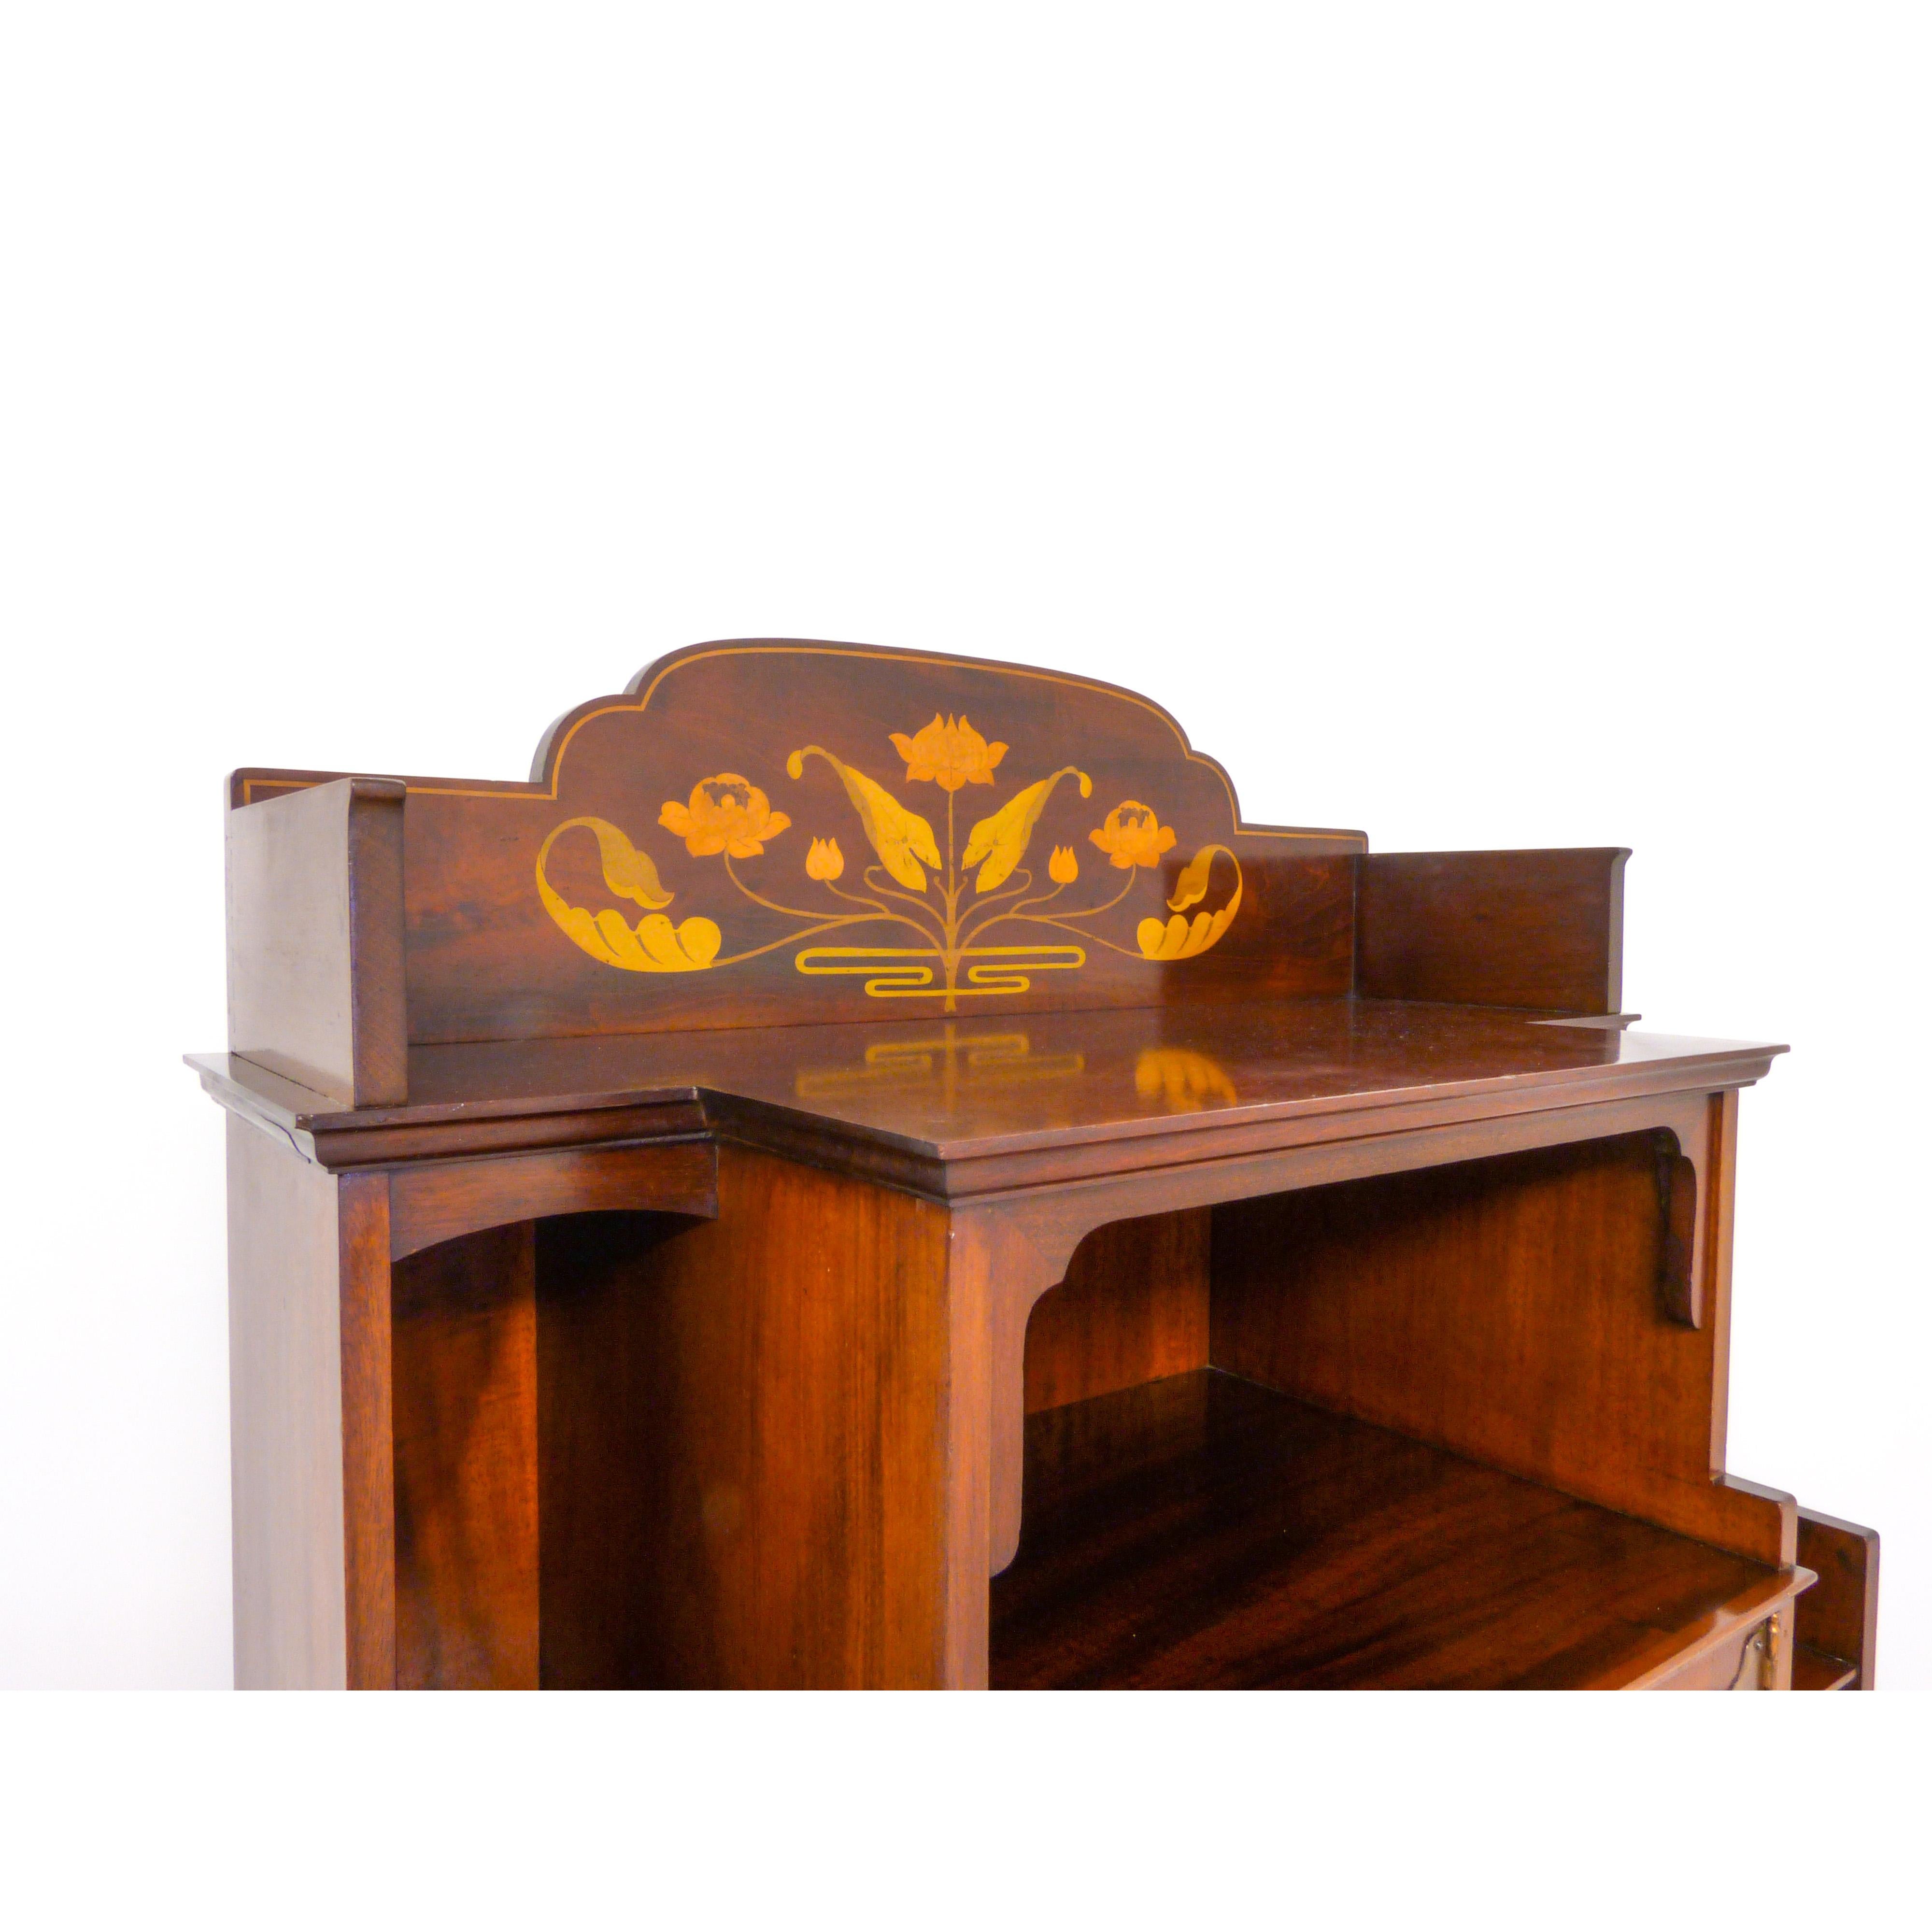 A stunning Art Nouveau antique music cabinet (circa 1890) of exceptional quality and extreme rarity. The body of the piece is solid mahogany throughout including the back and has beautiful satinwood with ebony cross banding along with boxwood